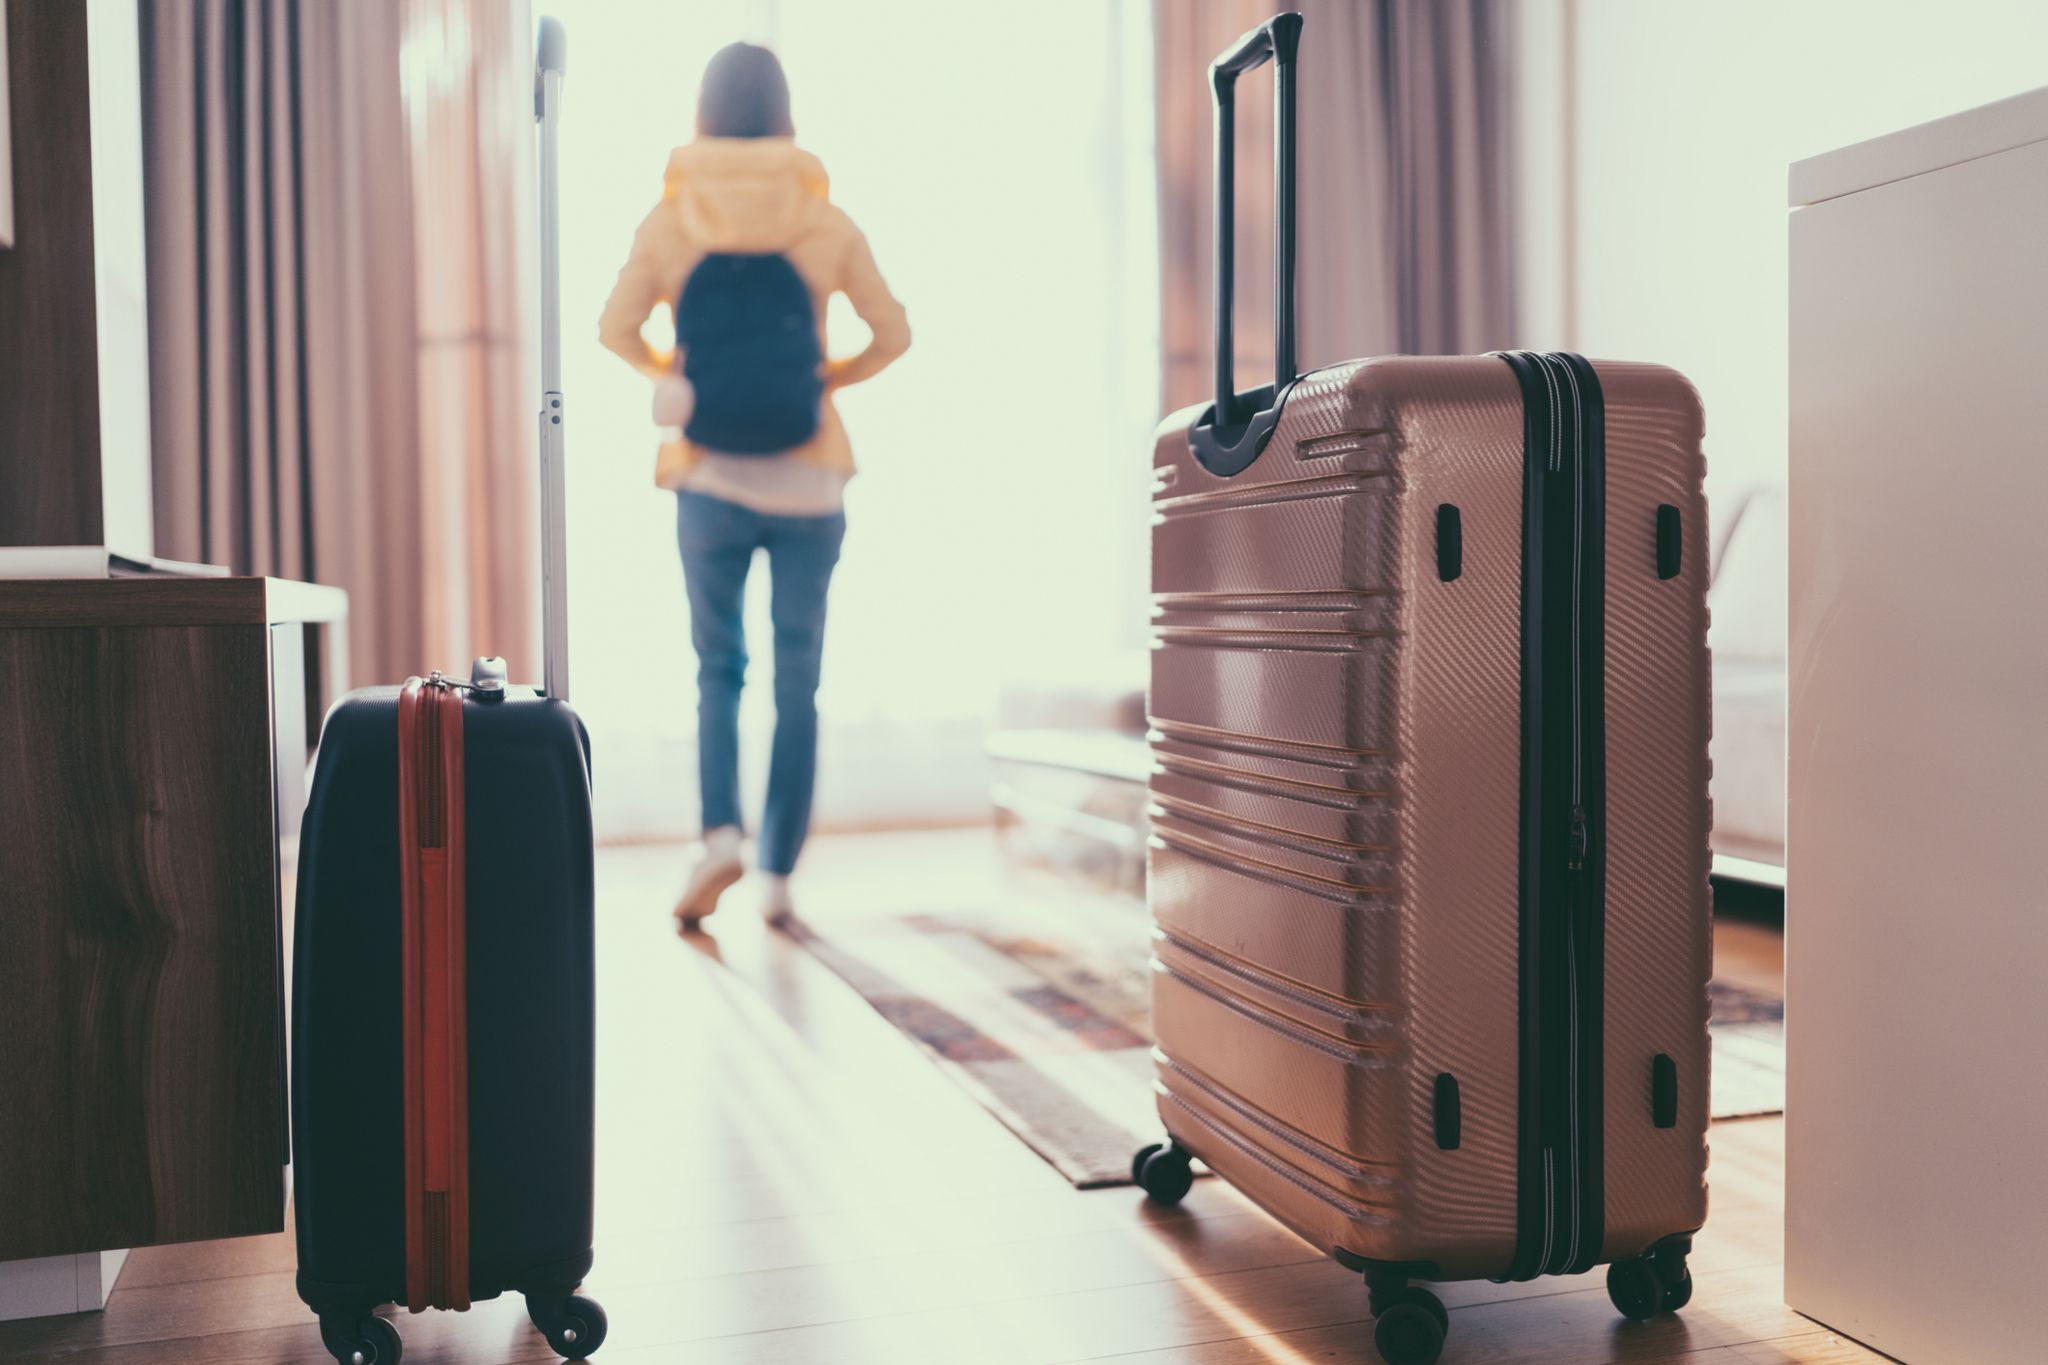 Woman who has just entered hotel room with suitcases